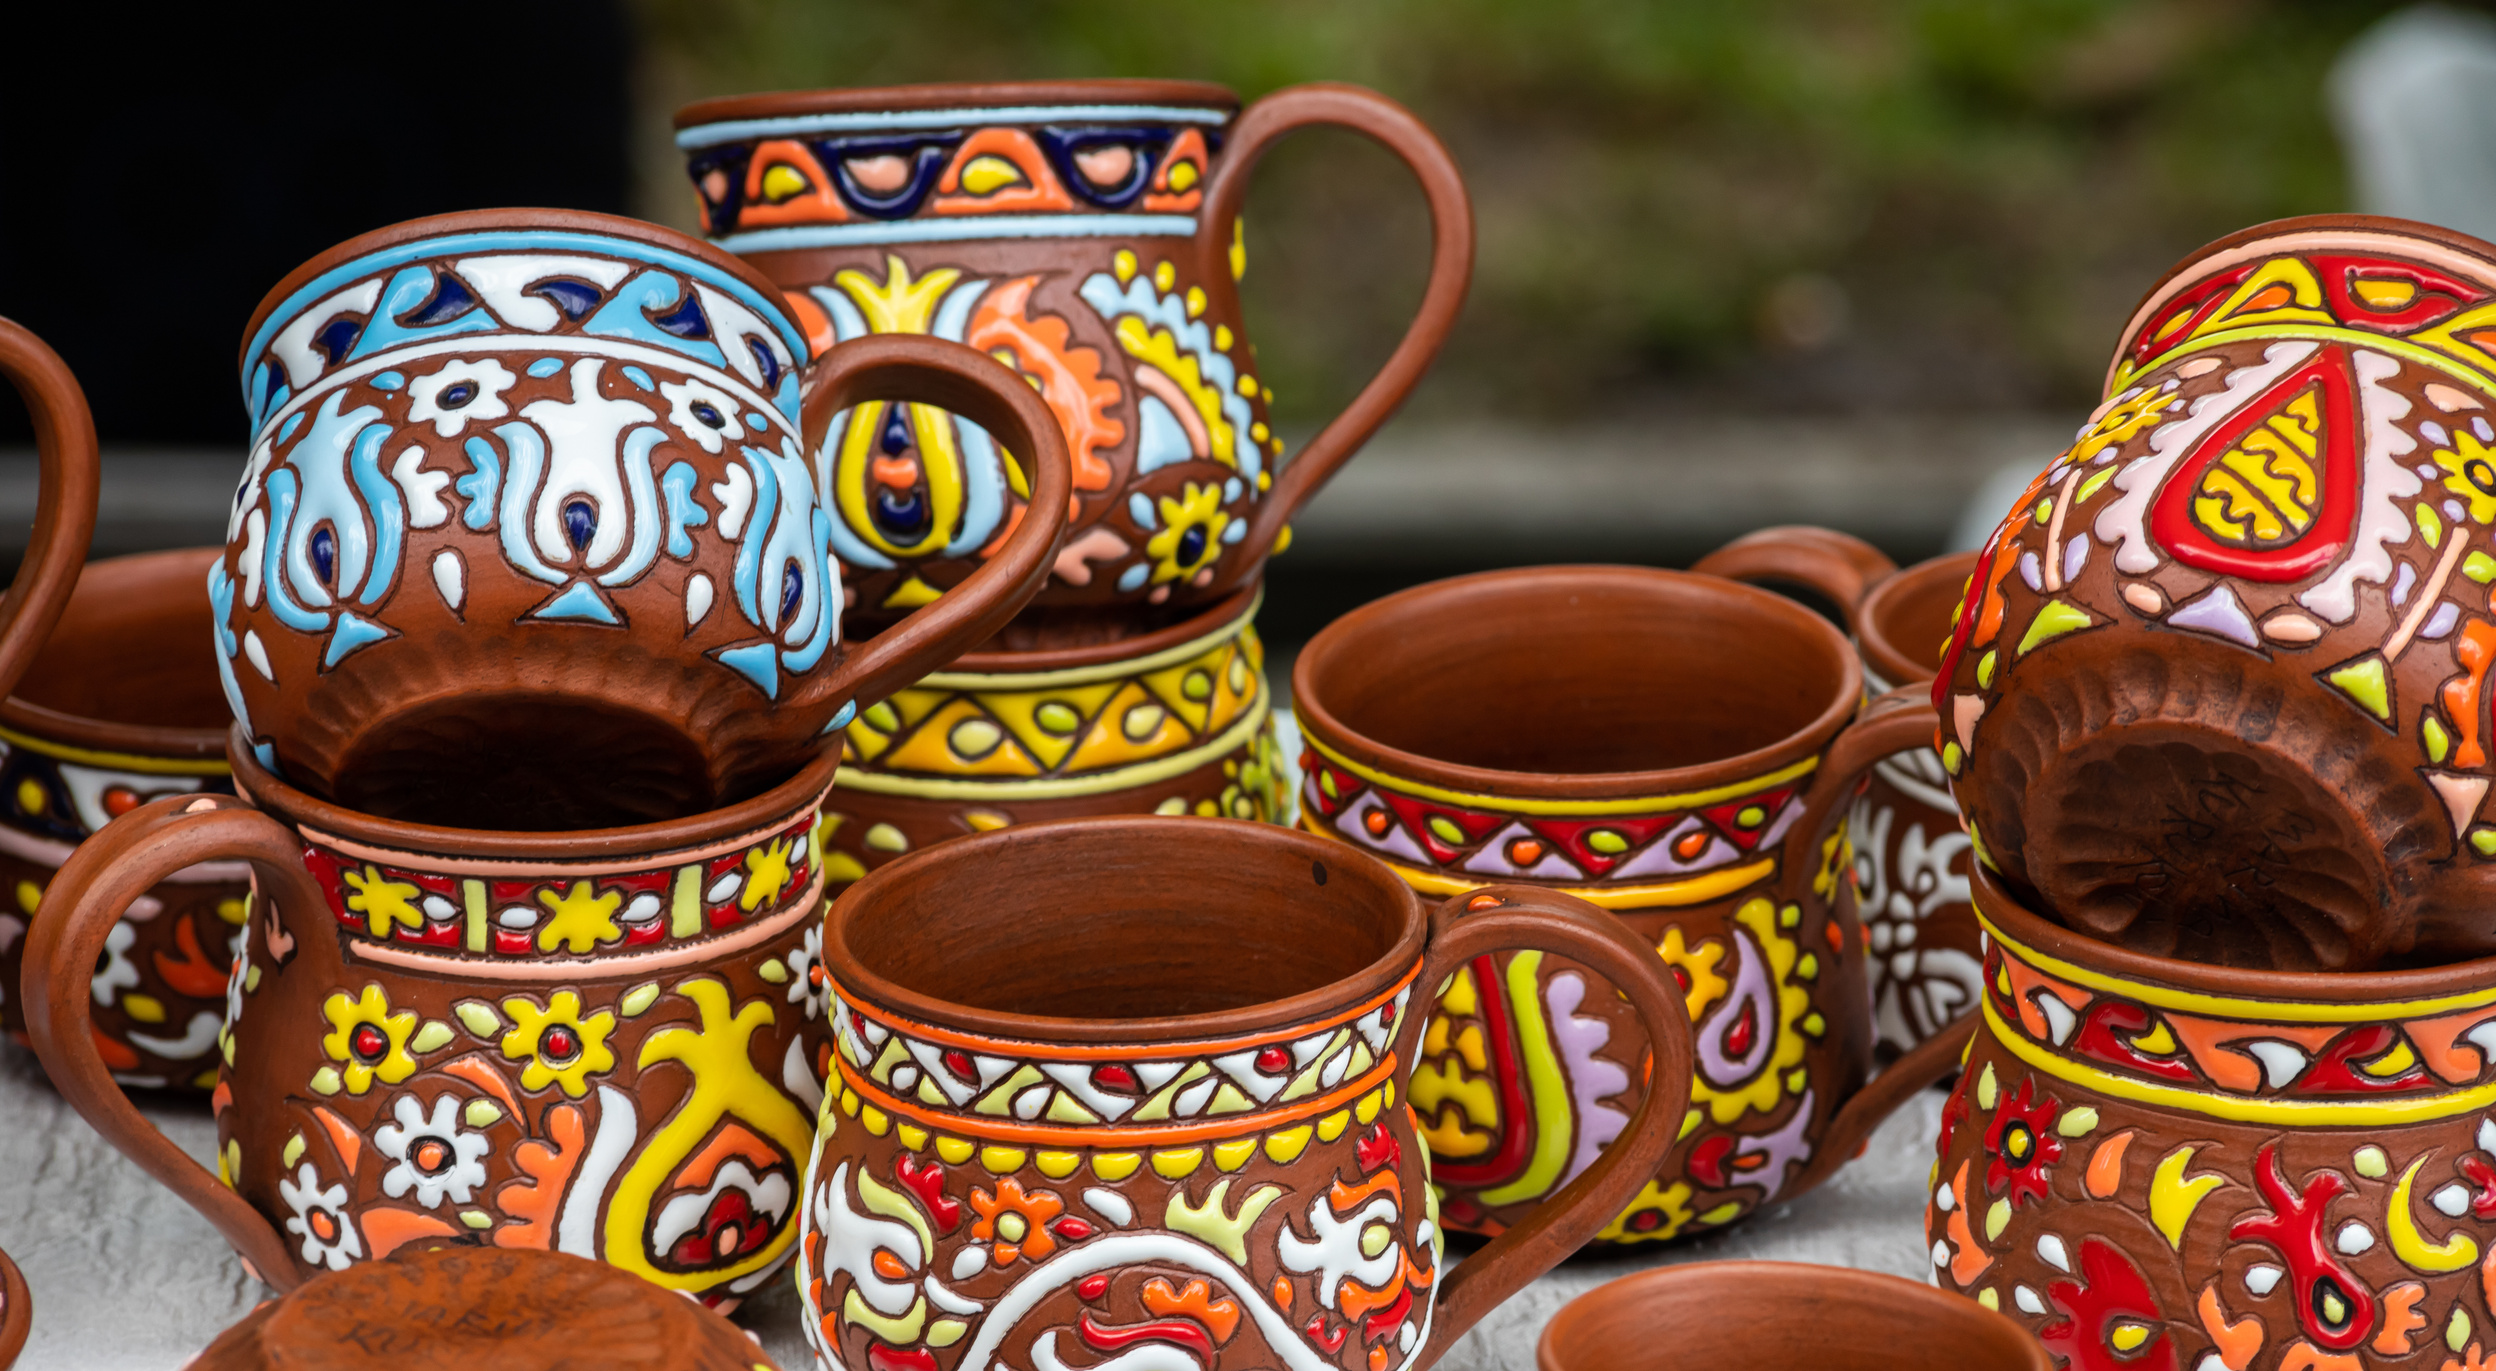 Traditional Homemade Ceramic Pots on Traditional Crafts Fair